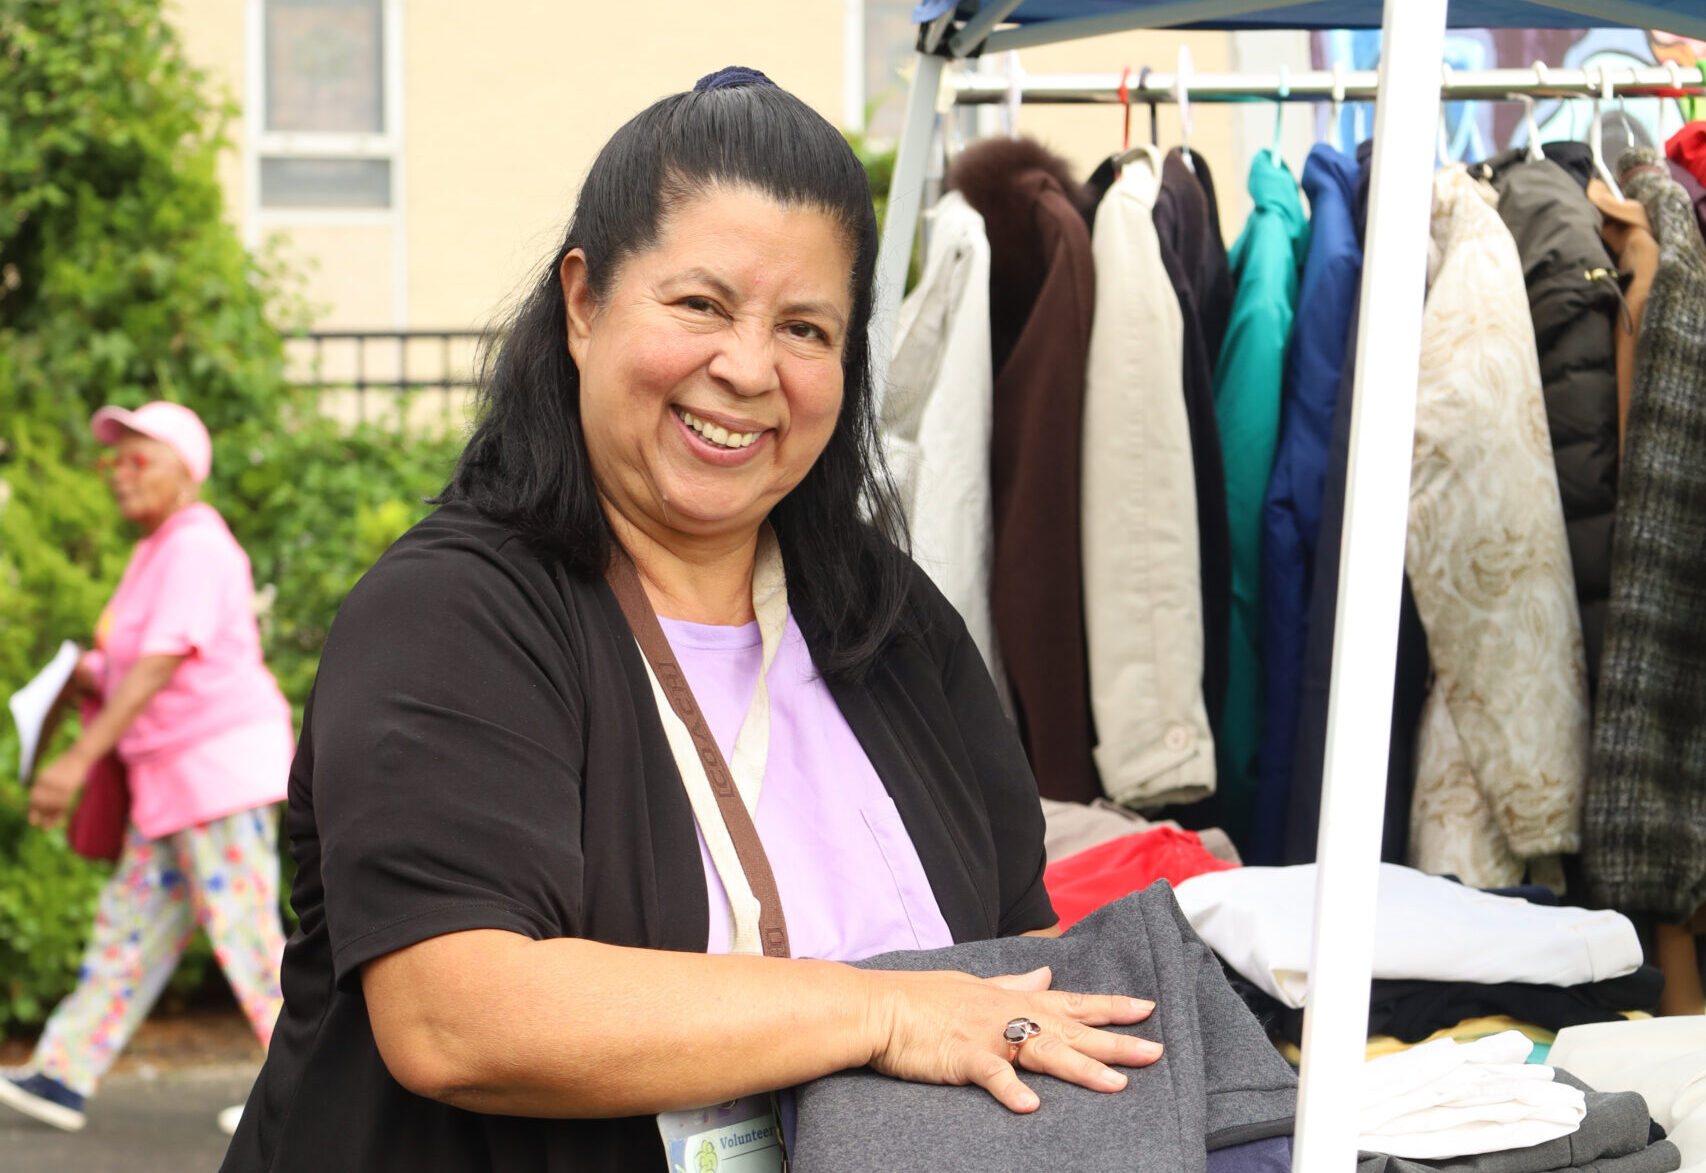 Woman smiling while folding clothes